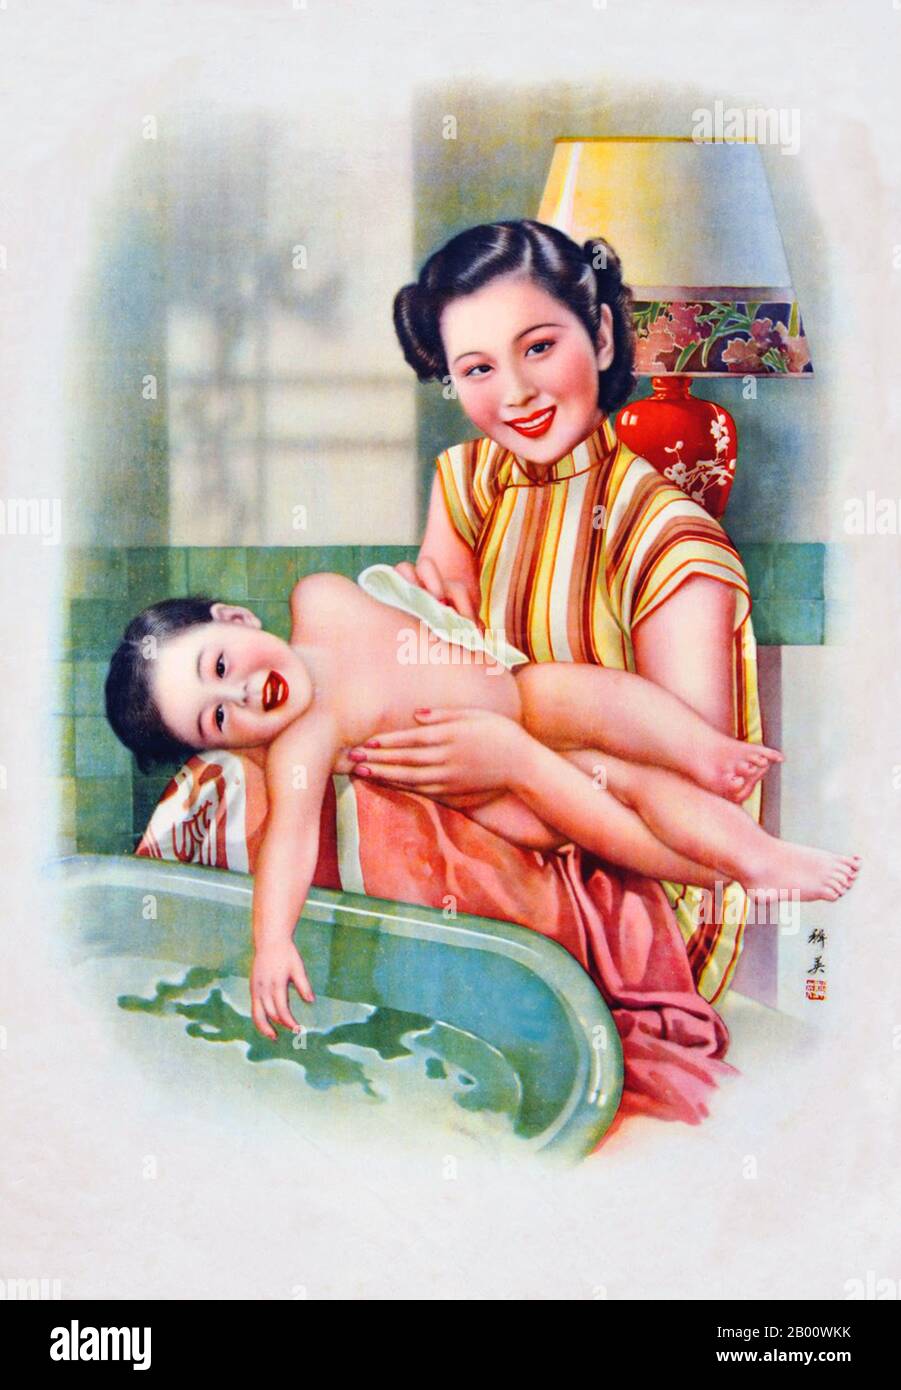 China: 'Finishing an Orchid-Water Bath', Shanghai, chromolithograph, 1930s.  International attention to Shanghai grew in the 19th century due to its economic and trade potential at the Yangtze River. During the First Opium War (1839–1842), British forces temporarily held the city. The war ended with the 1842 Treaty of Nanjing, opening Shanghai and other ports to international trade. In 1863, the British settlement, located in Huangpu district, and the American settlement, in Hongkou district, joined in order to form the International Settlement. Stock Photo